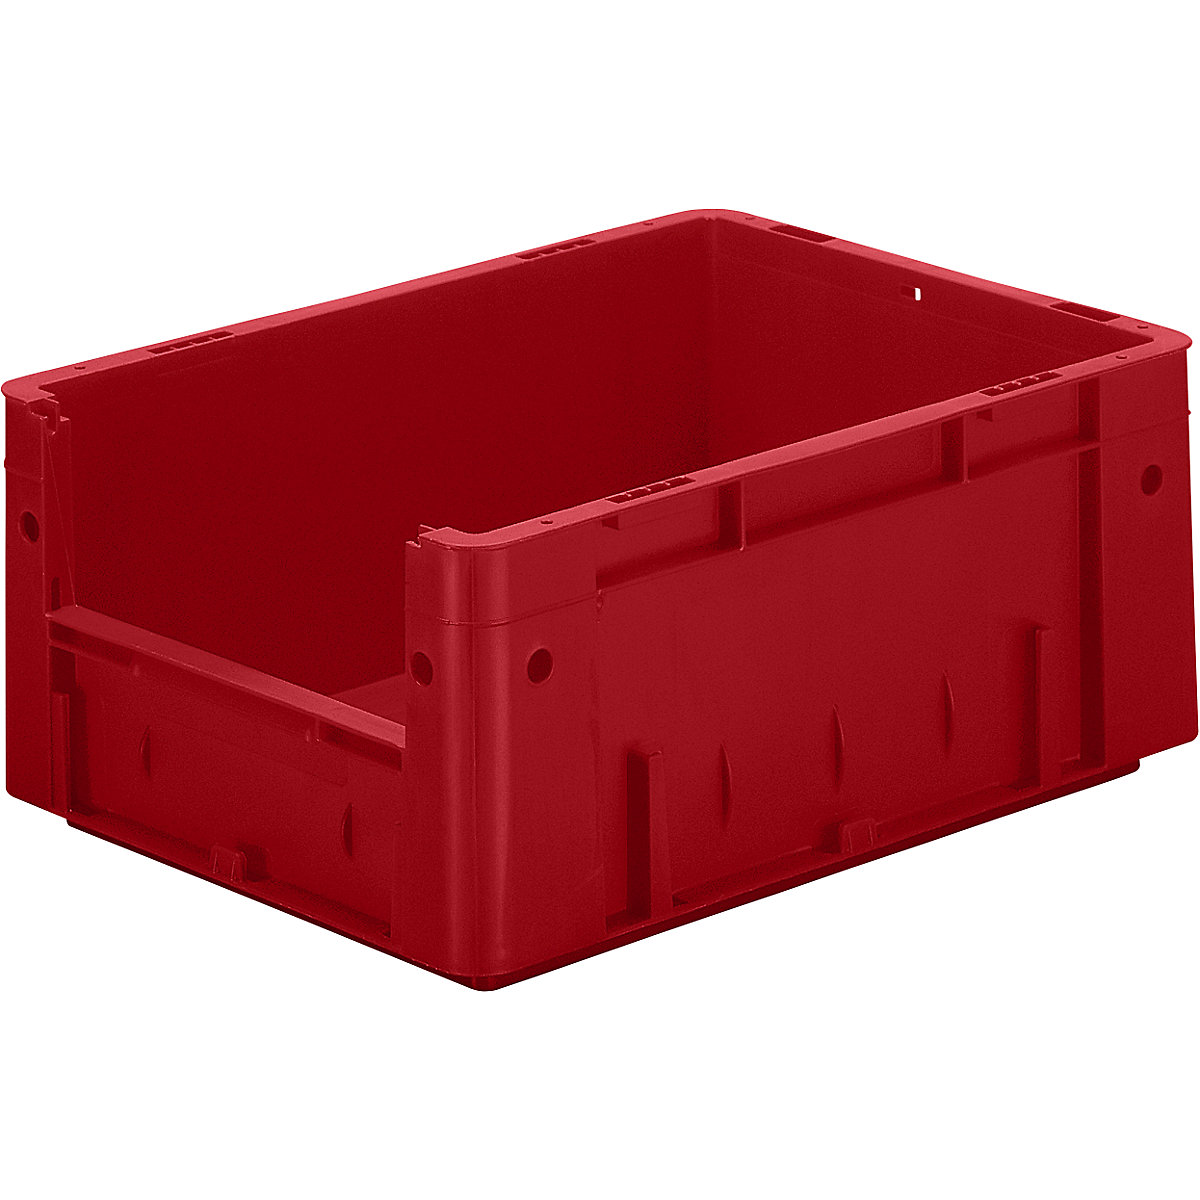 Euro stacking container, capacity 14.5 l, LxWxH 400 x 300 x 175 mm, pack of 4, red-3